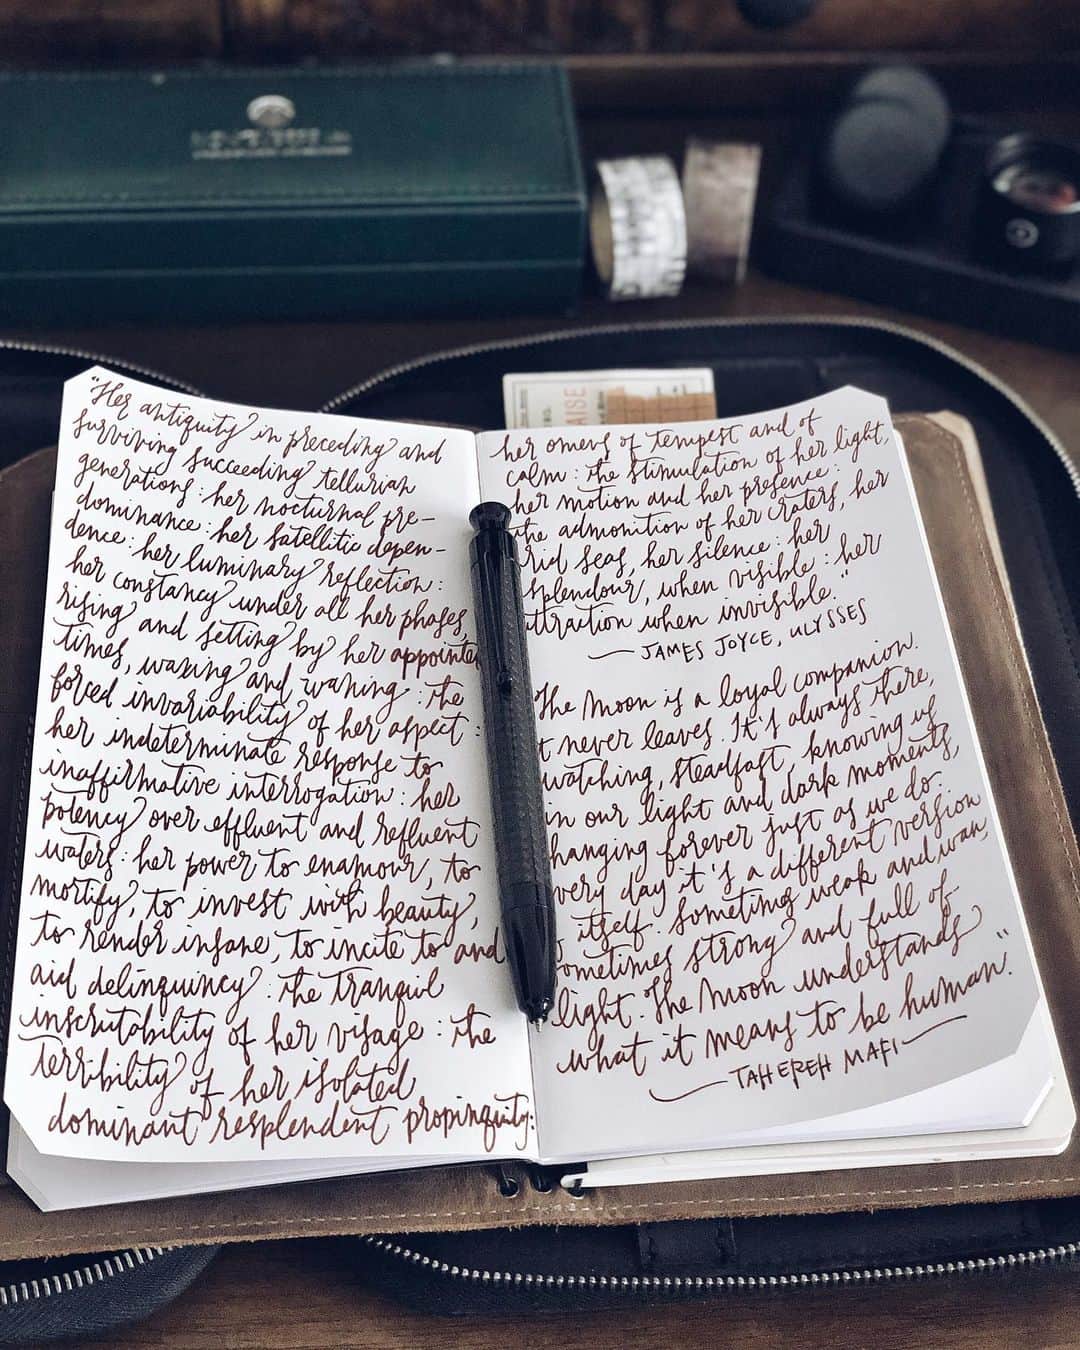 Catharine Mi-Sookさんのインスタグラム写真 - (Catharine Mi-SookInstagram)「New pen. New ink. New bag. And a splendid Sunday afternoon to commence each one into my creative space followed by an afternoon outing to boot. . . First up: Meet the Engage Rollerball Pen by @monteverdepens_official which is not only stunning but is unique in that it takes a cartridge converter and uses fountain pen ink! I love that! I had never even heard of such a writing instrument before. I chose Pumpkin Cake ink from their new Sweet Life ink collection. And I made a video showing how to fill it which you can swipe past the photos to the end to see! A big heartfelt thank you to the kind folks at @monteverdepens_official for sending these treasures for me to test out! . . Next up: if any a bag spoke to me so specifically in this season, it would hands-down be The Around Tote by @shopchc. And further, this work of art is accompanied with a poem (be still my heart) that CHC founder, Chelli Look, wrote: . . “For a season that feels blind and you can only feel  your way around.  For a season of 360's where there's clarity all the way around.  For a problem-solving season bringing fresh perspective; a new angle, a right angle, with a curve.  For a season when you feel like a square peg "fitting" into a round hole.  Sometimes peace for the season comes from a season-less piece.” . . Now it’s time to tuck and tote these tools and go live some poetry out there, under the sun, with devices off, and spirits happy and free. Wishing everyone a beautiful rest of the day and start to a new week. . . #newpen #notafountainpen #teammonteverde #monteverdepen #monteverdeink #fountainpenink #shopchc #leathertote #onmydesk #thisisground #tigmod #deskgoals #creativespace #inherstudio #penmanship #dailyjournal #journaling #journallove #stationery #stationerylove #thedailywriting #shotonmoment #momentwide #loveforanalogue #thedailywriting #aquietstyle #abmathome #abmspaces」7月15日 5時54分 - catharinemisook